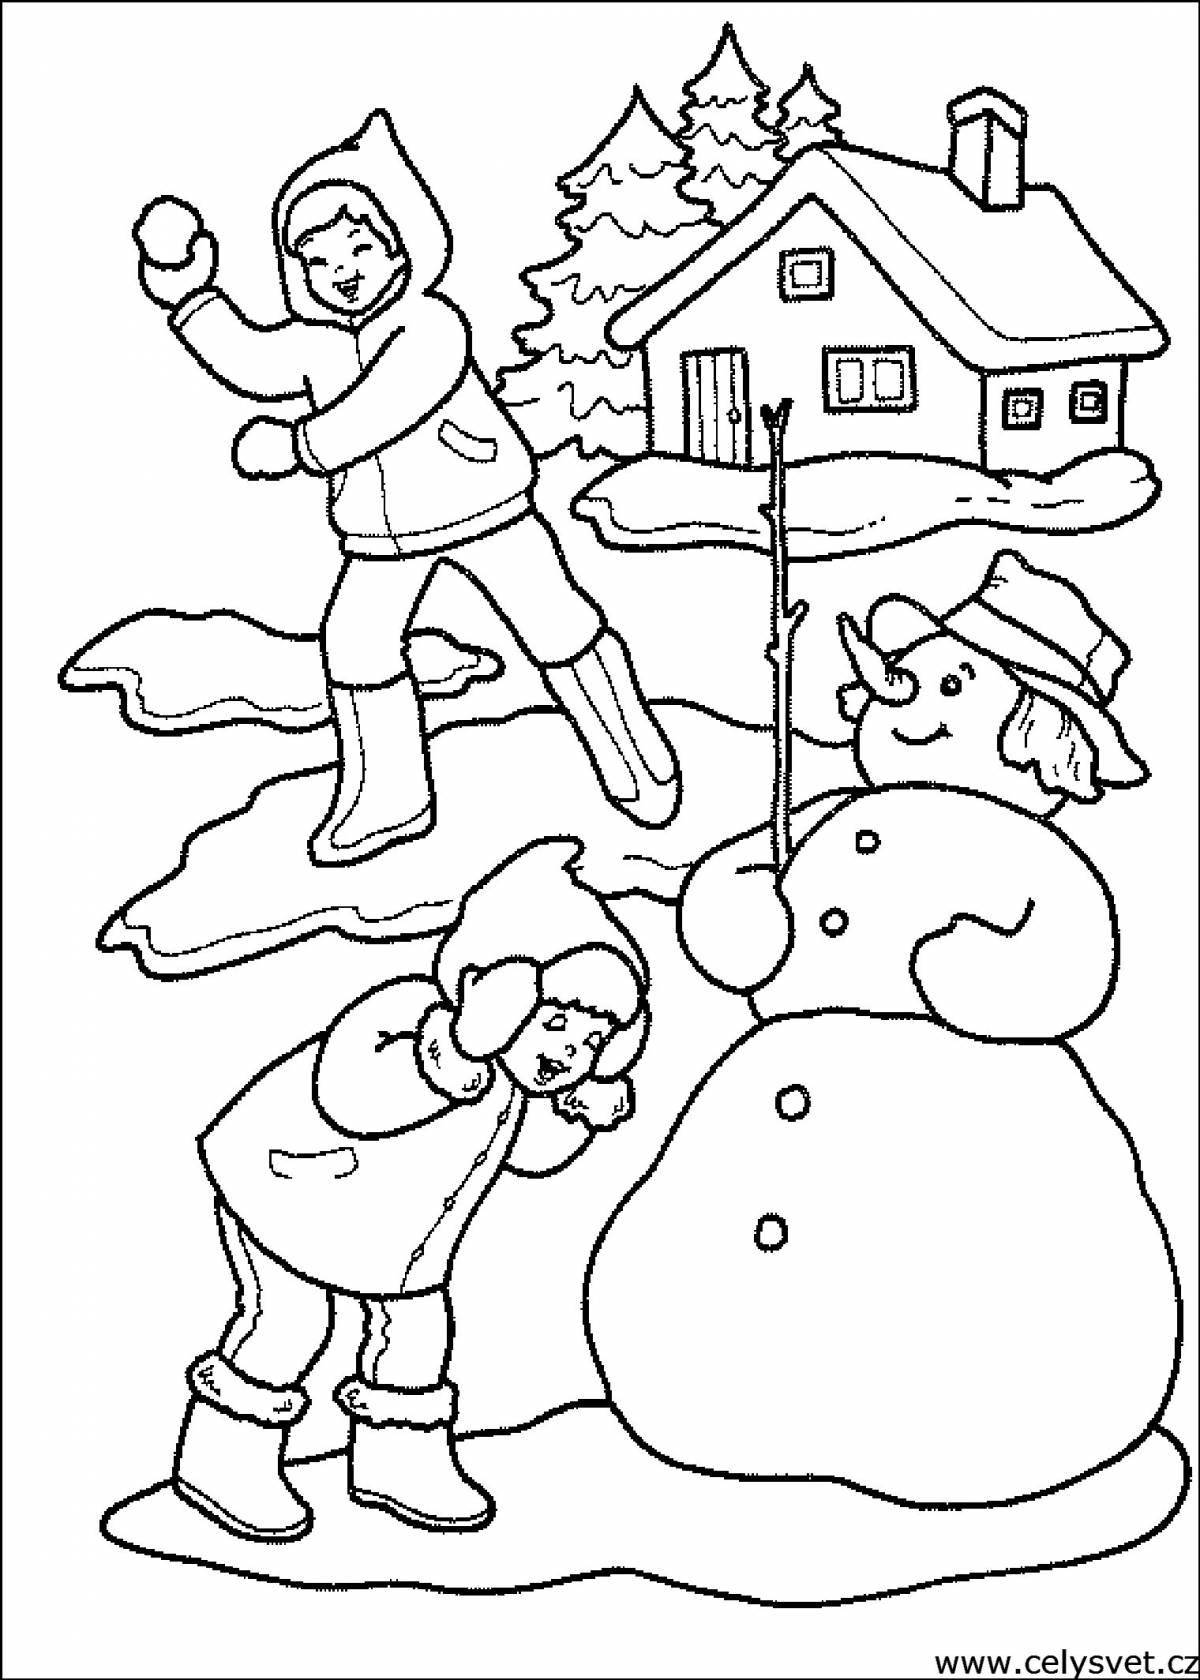 Exciting Christmas coloring pages